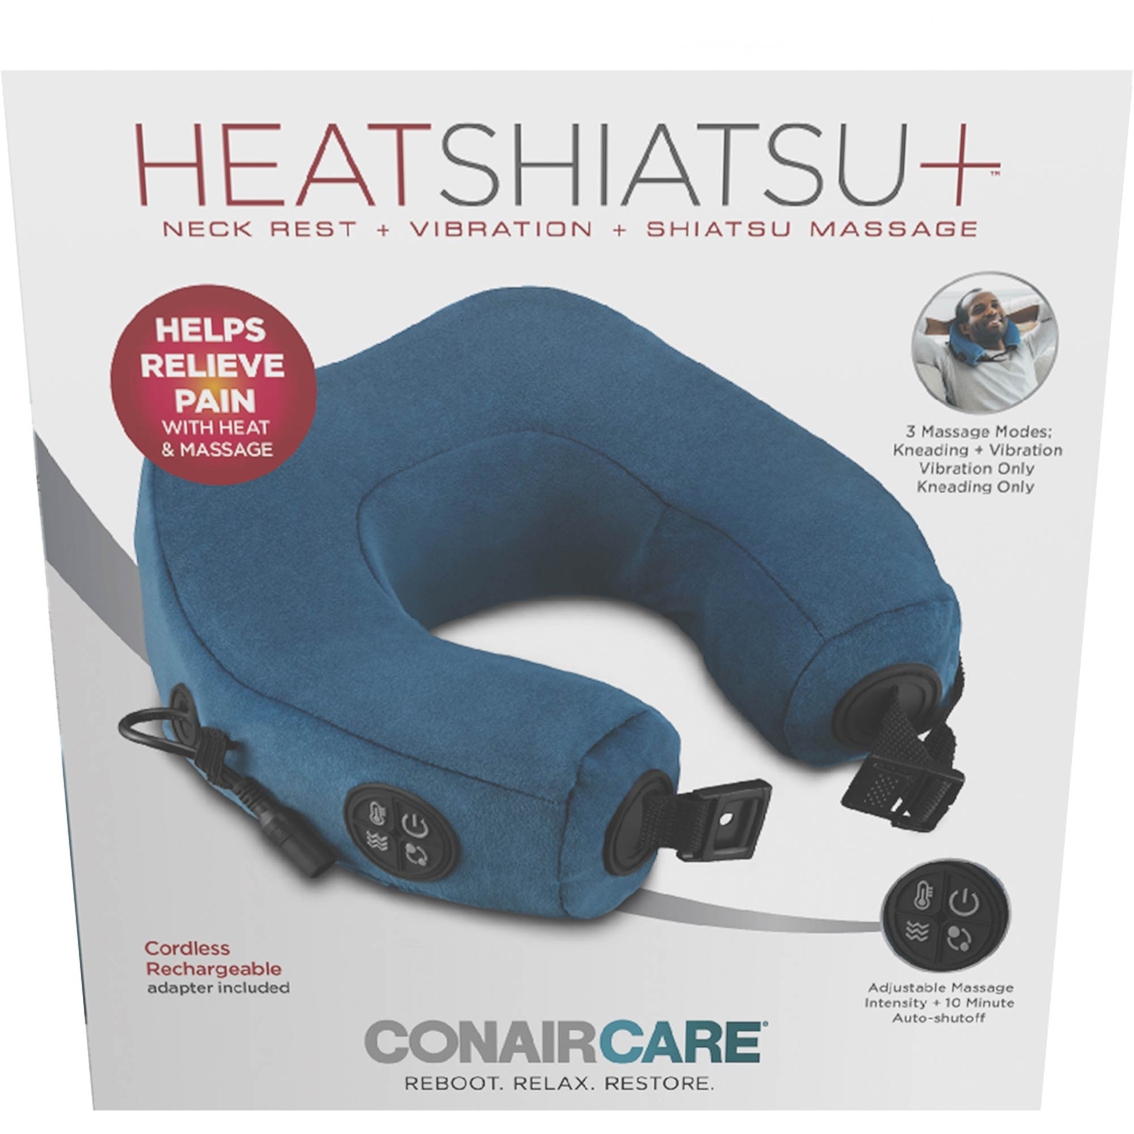 NEW Shiatsu Neck Back Massager with Heat - health and beauty - by